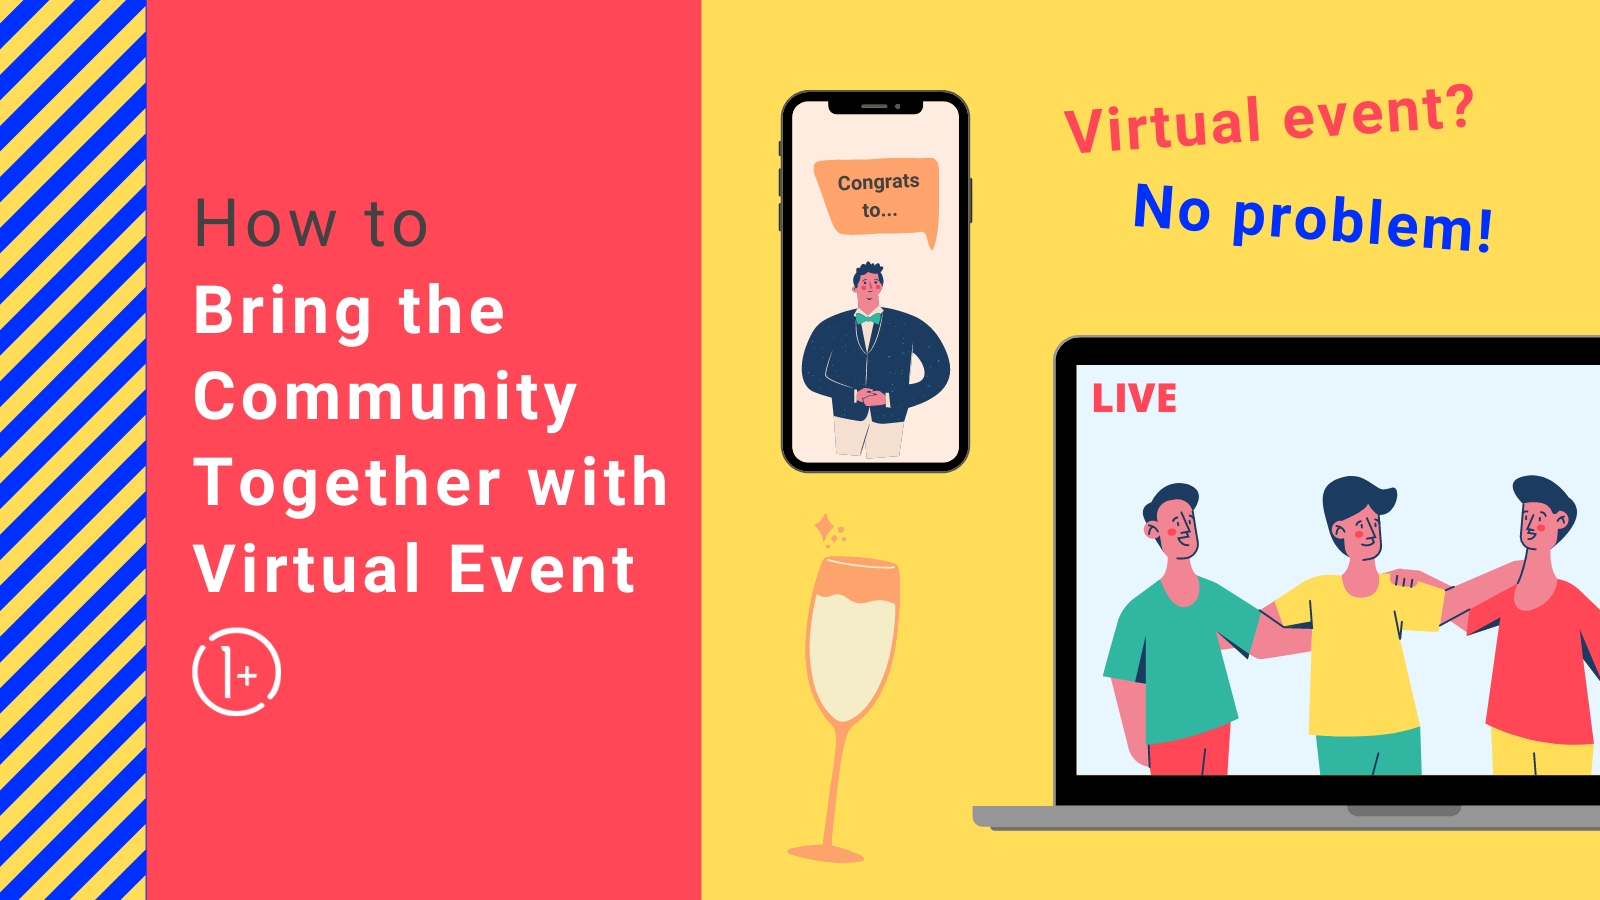 How to bring the community together with virtual event - 1 Plus Events